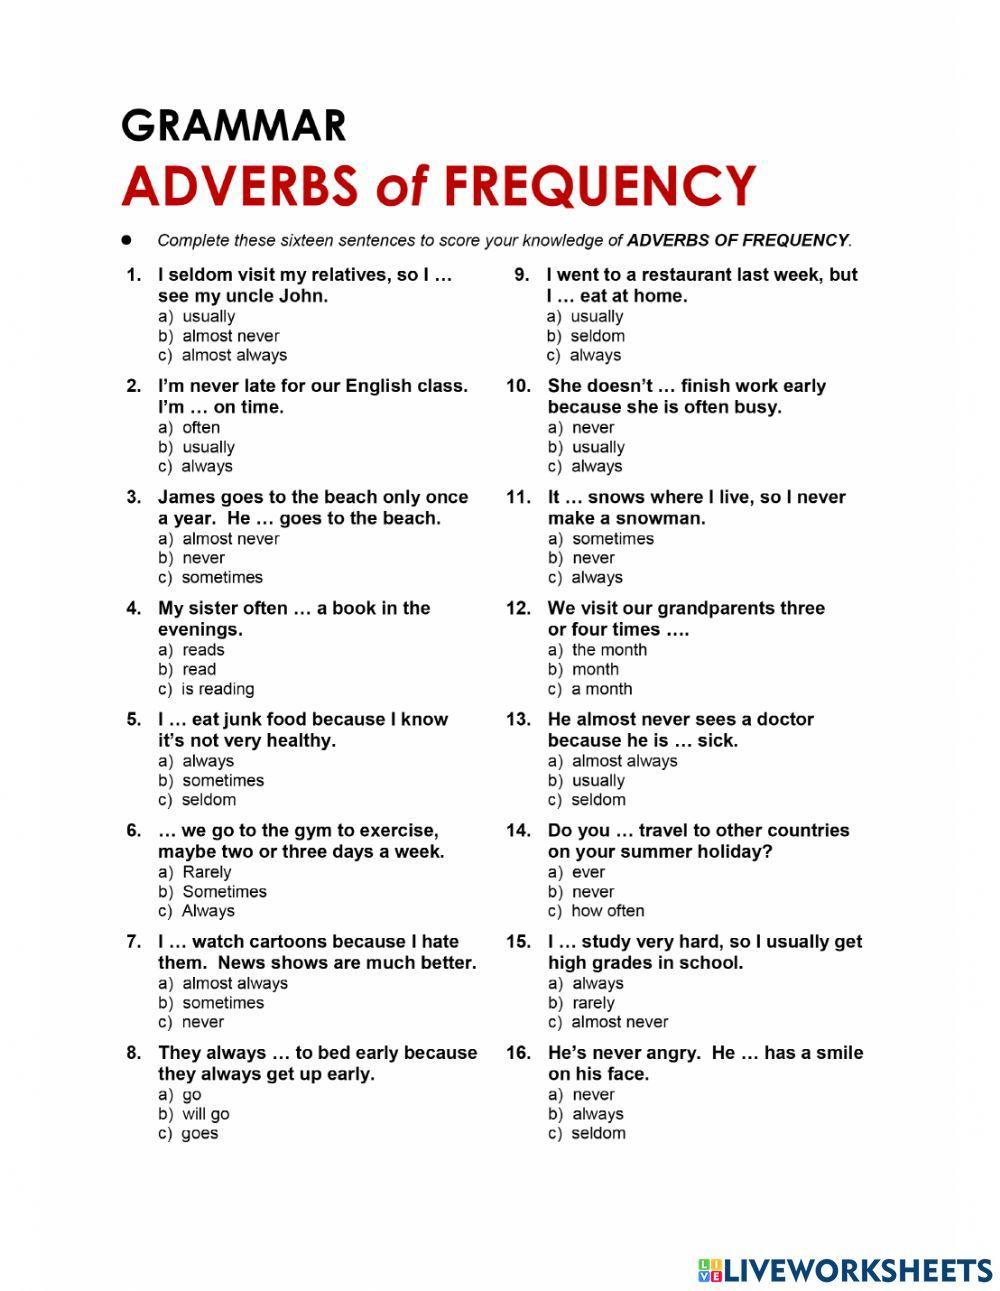 Adverb of frequency